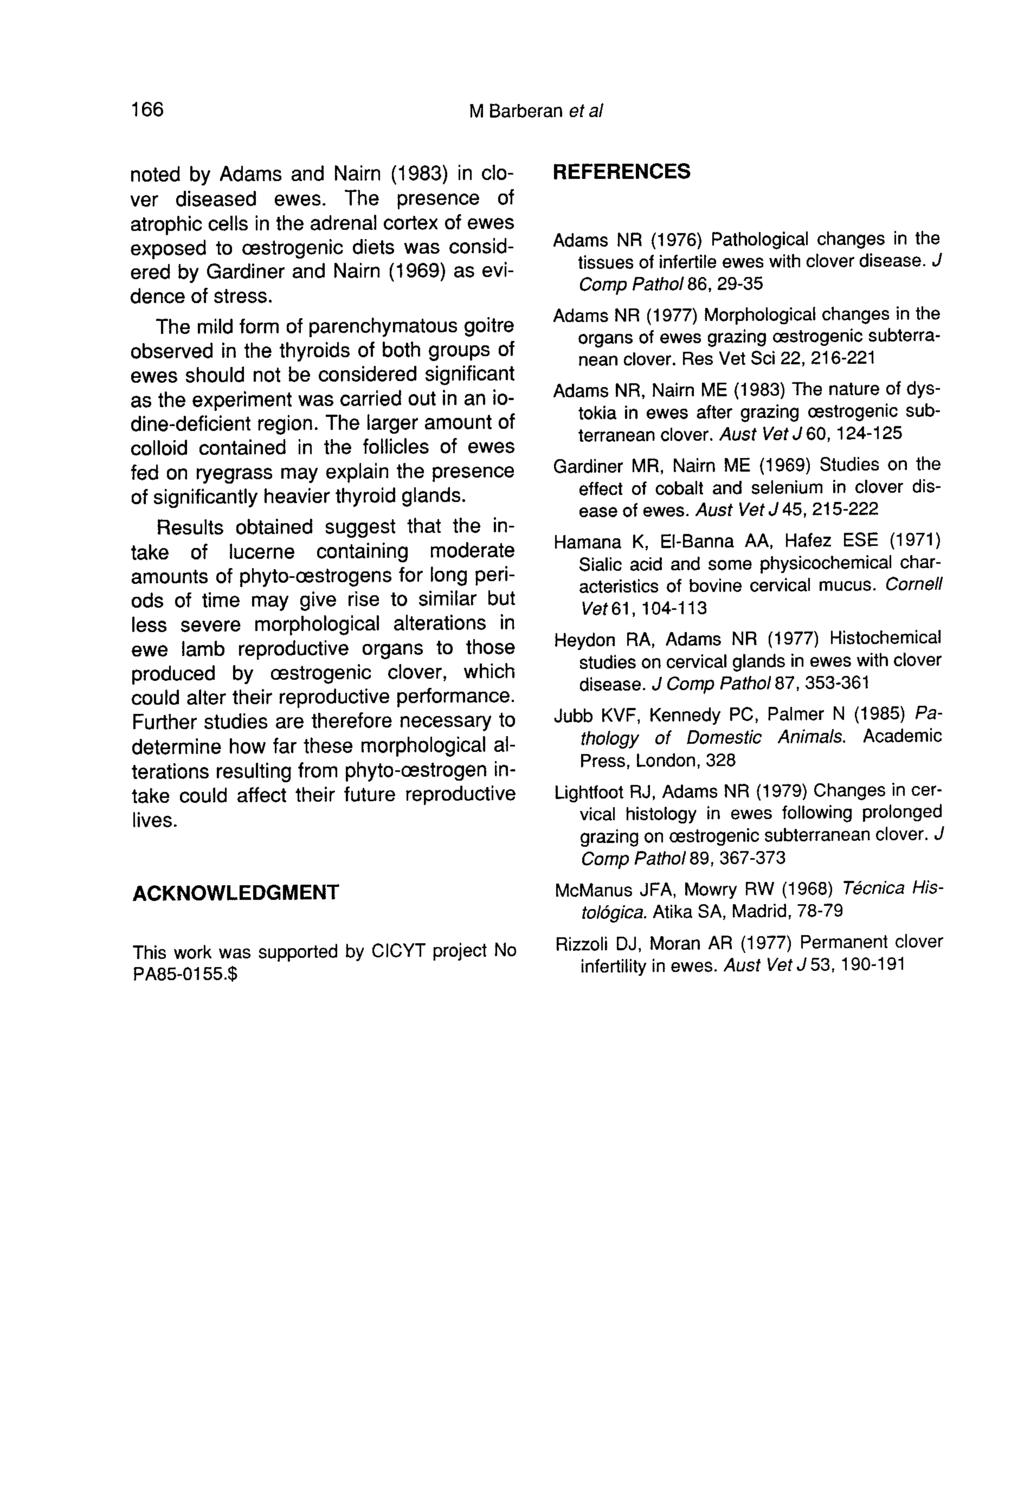 noted by Adams and Nairn (1983) in clover diseased ewes.